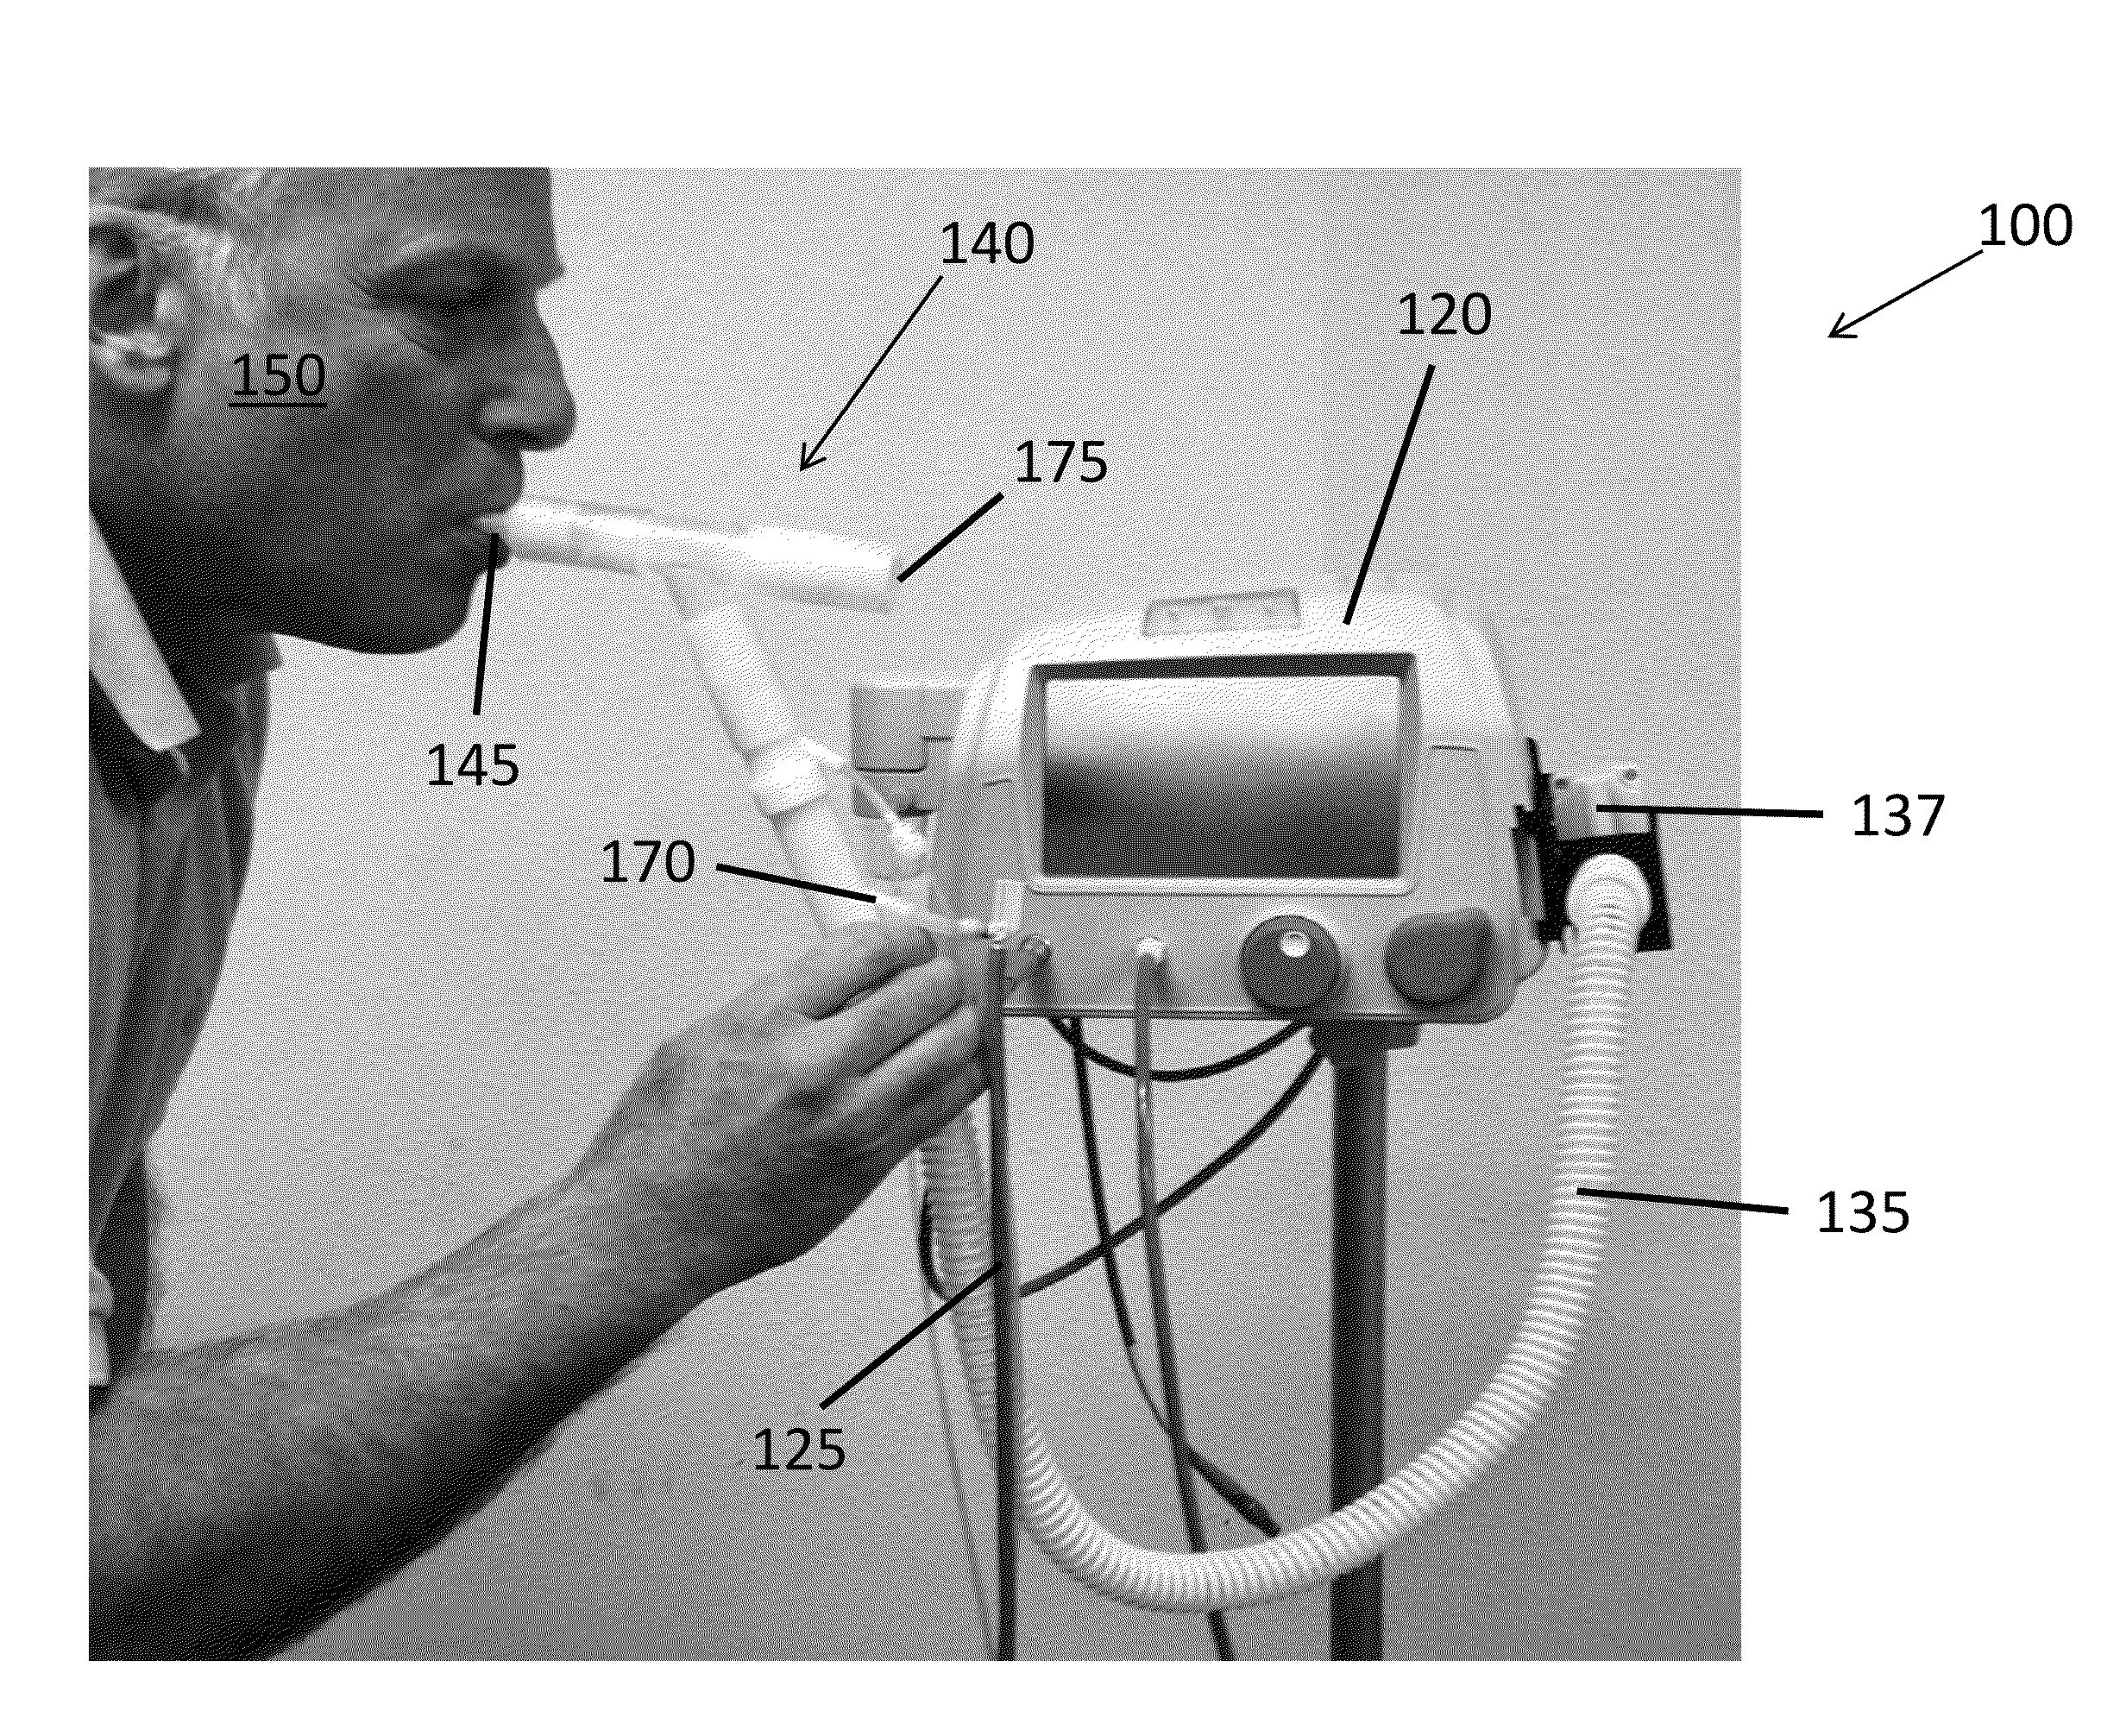 System and Method for High Concentration Nitric Oxide Delivery